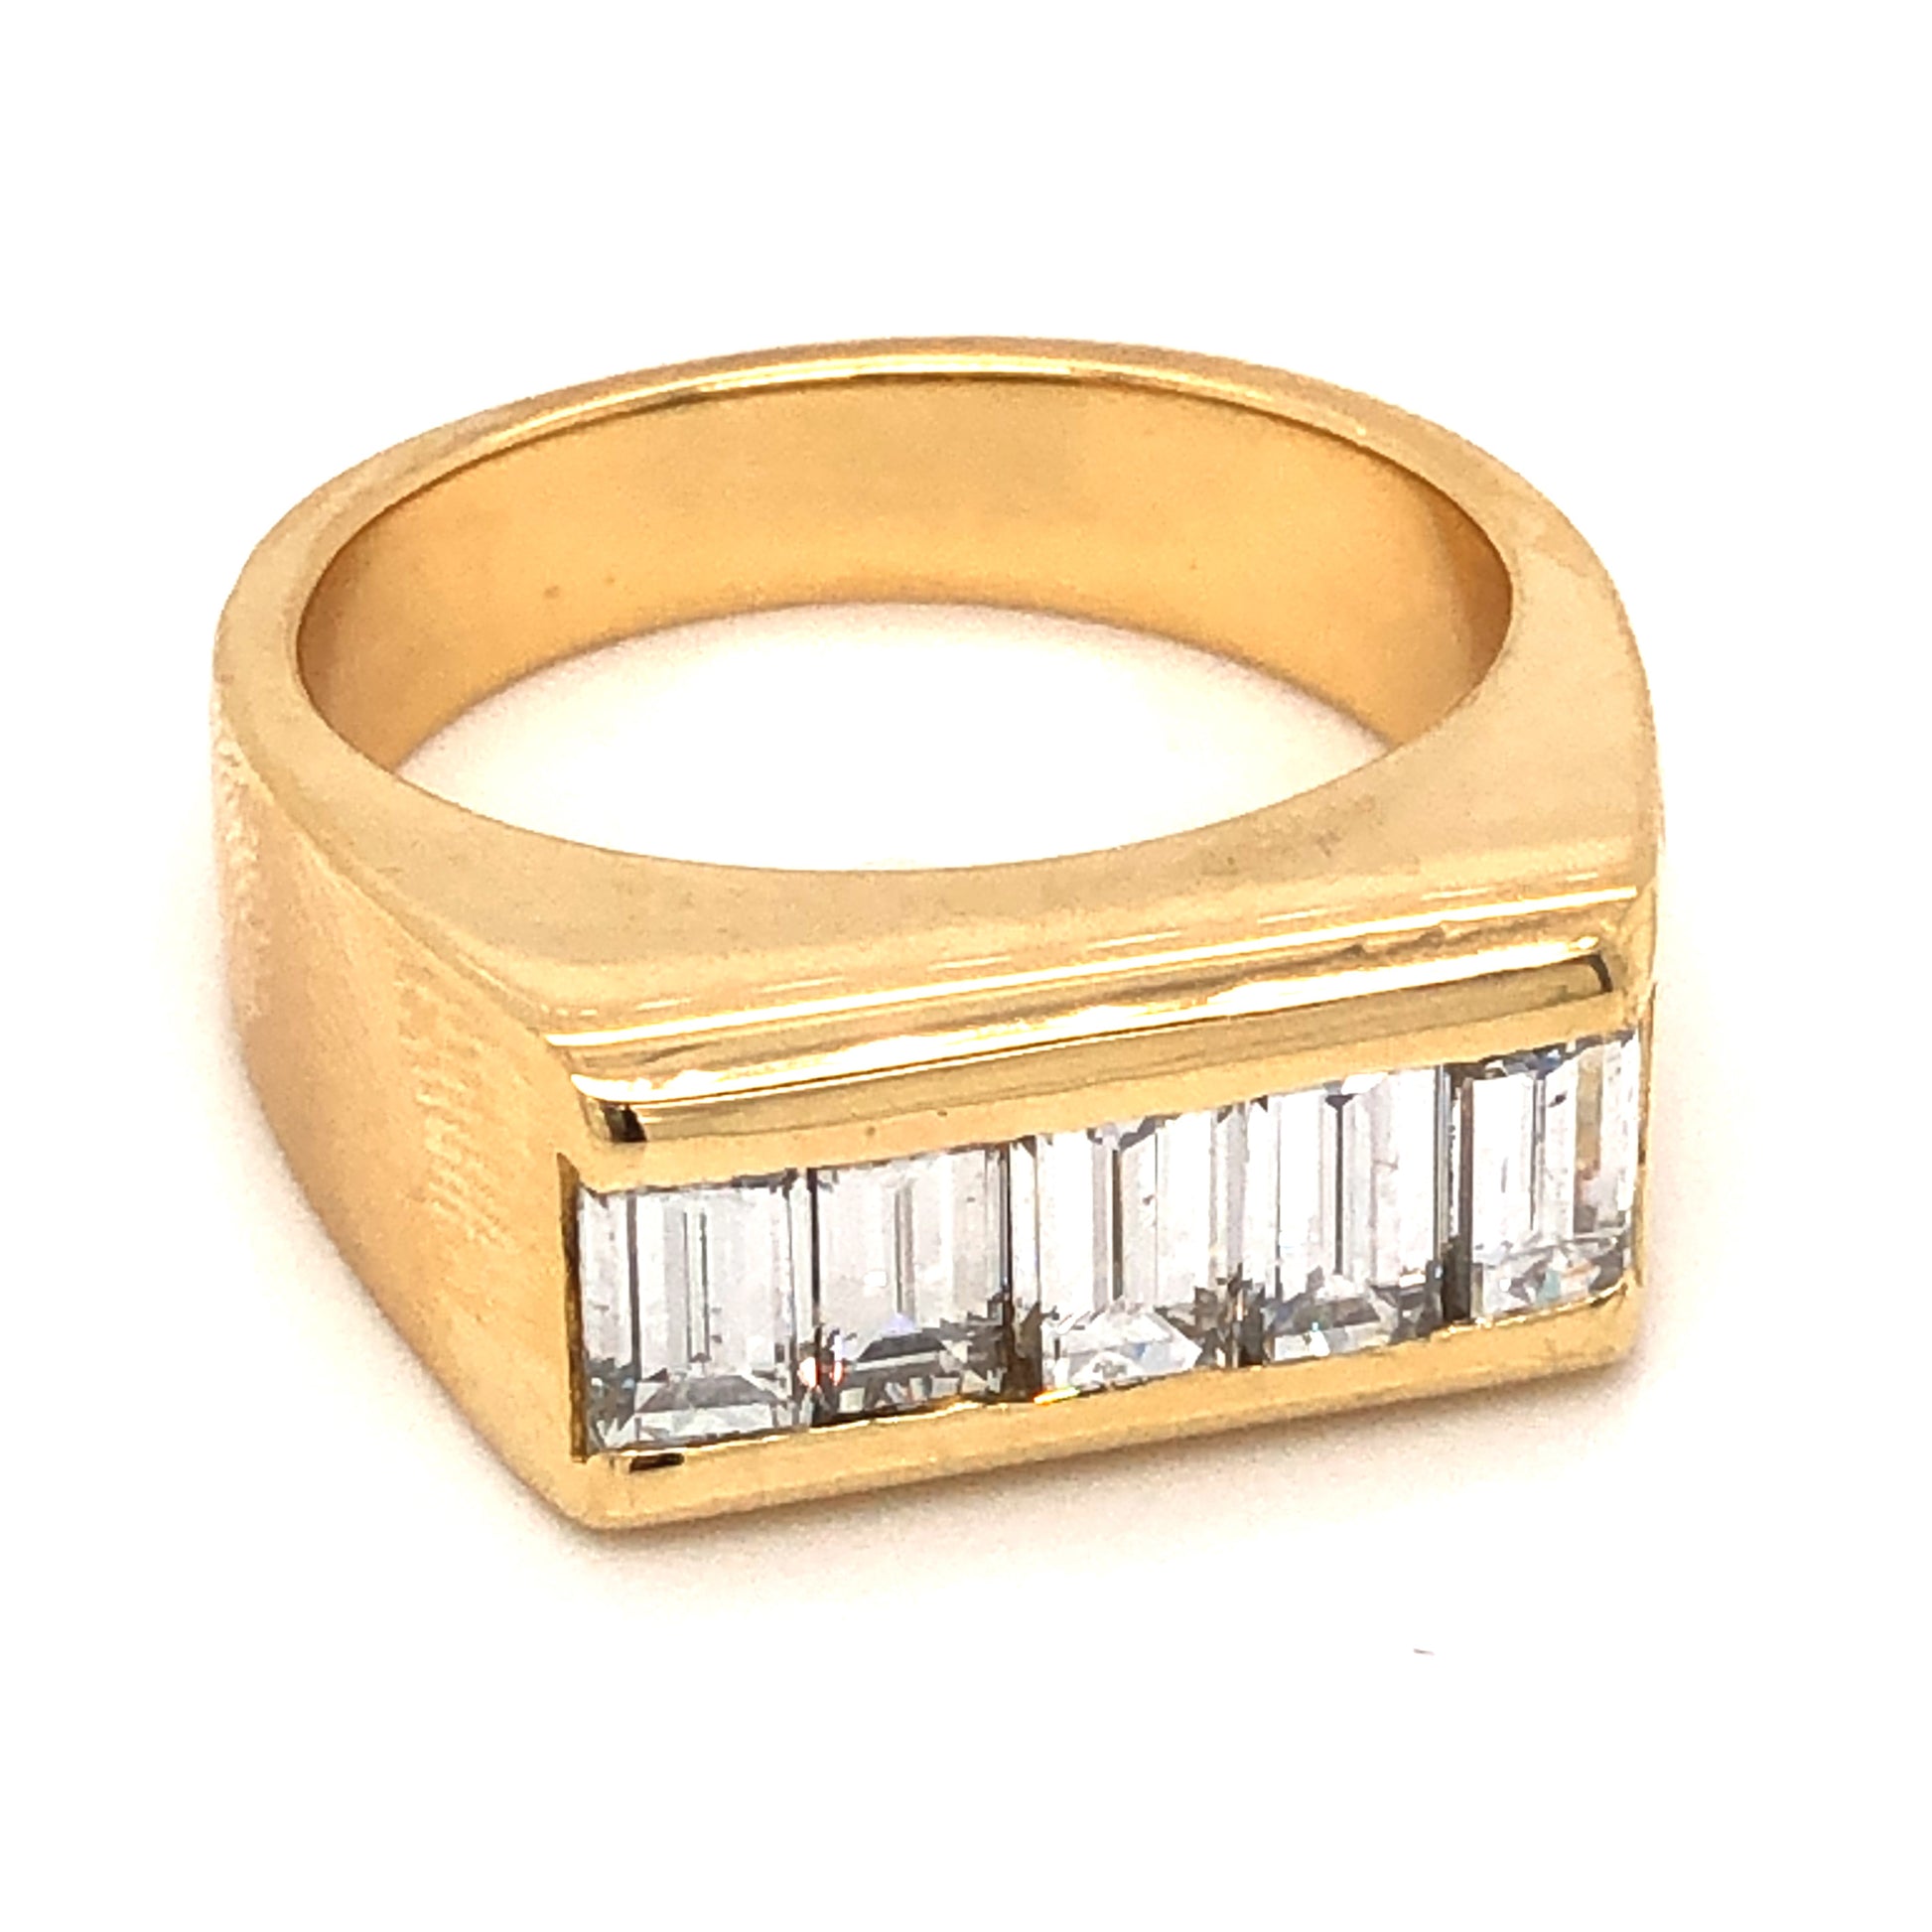 1.60 Baguette Cut Diamond Cocktail Ring in 18k Yellow GoldComposition: PlatinumRing Size: 8.5Total Diamond Weight: 1.60 ctTotal Gram Weight: 15.4 gInscription: 18K